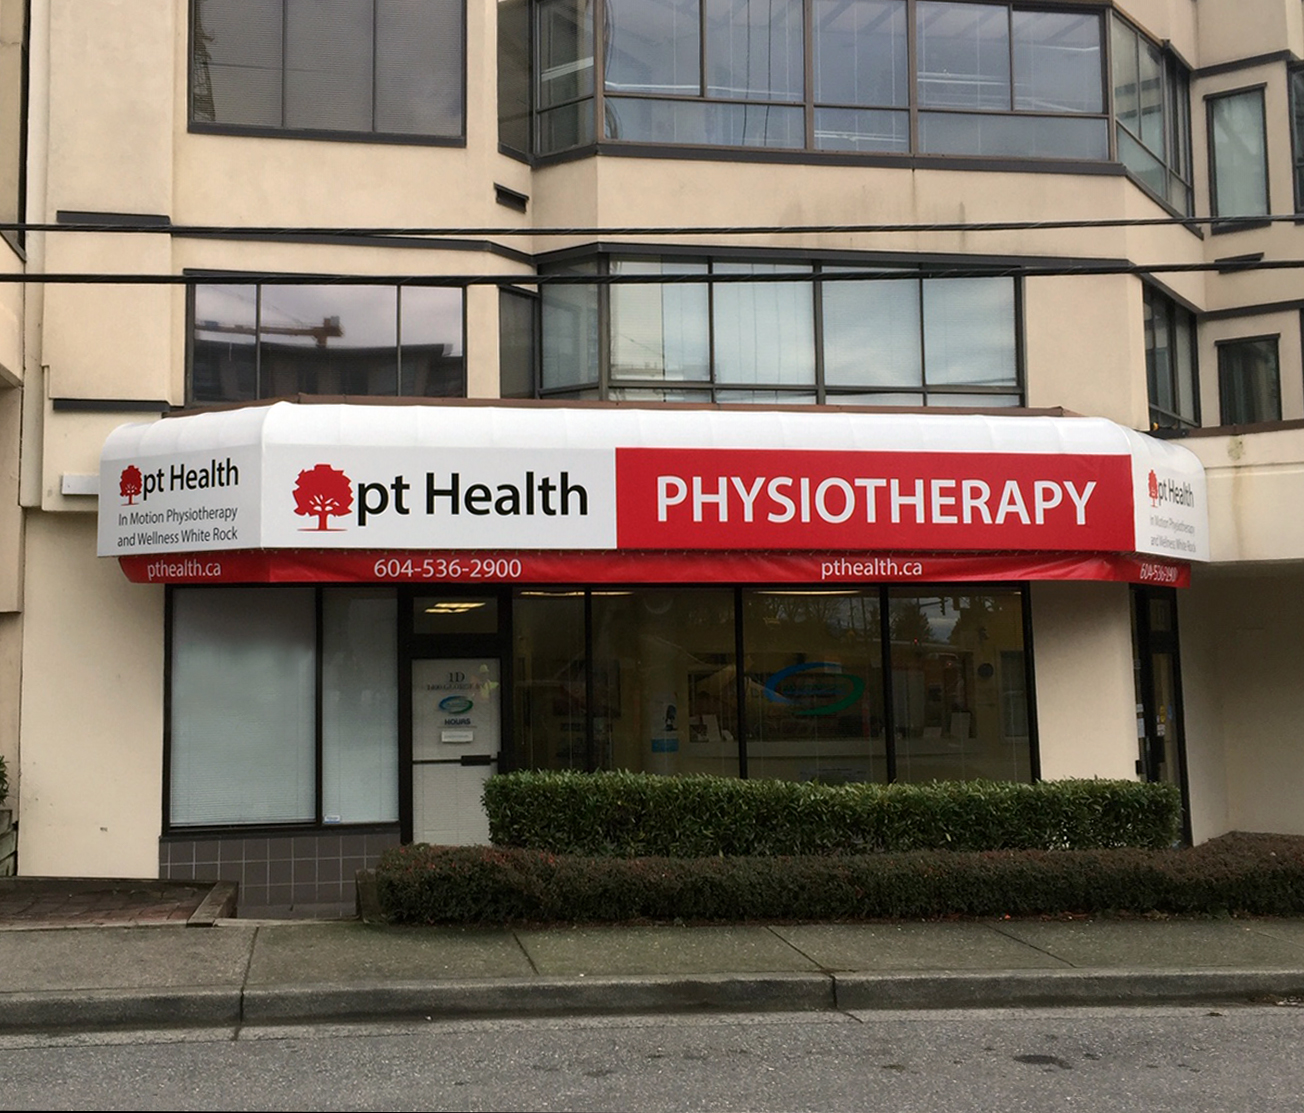 pt health in motion physiotherapy and wellness white rock clinic exterior